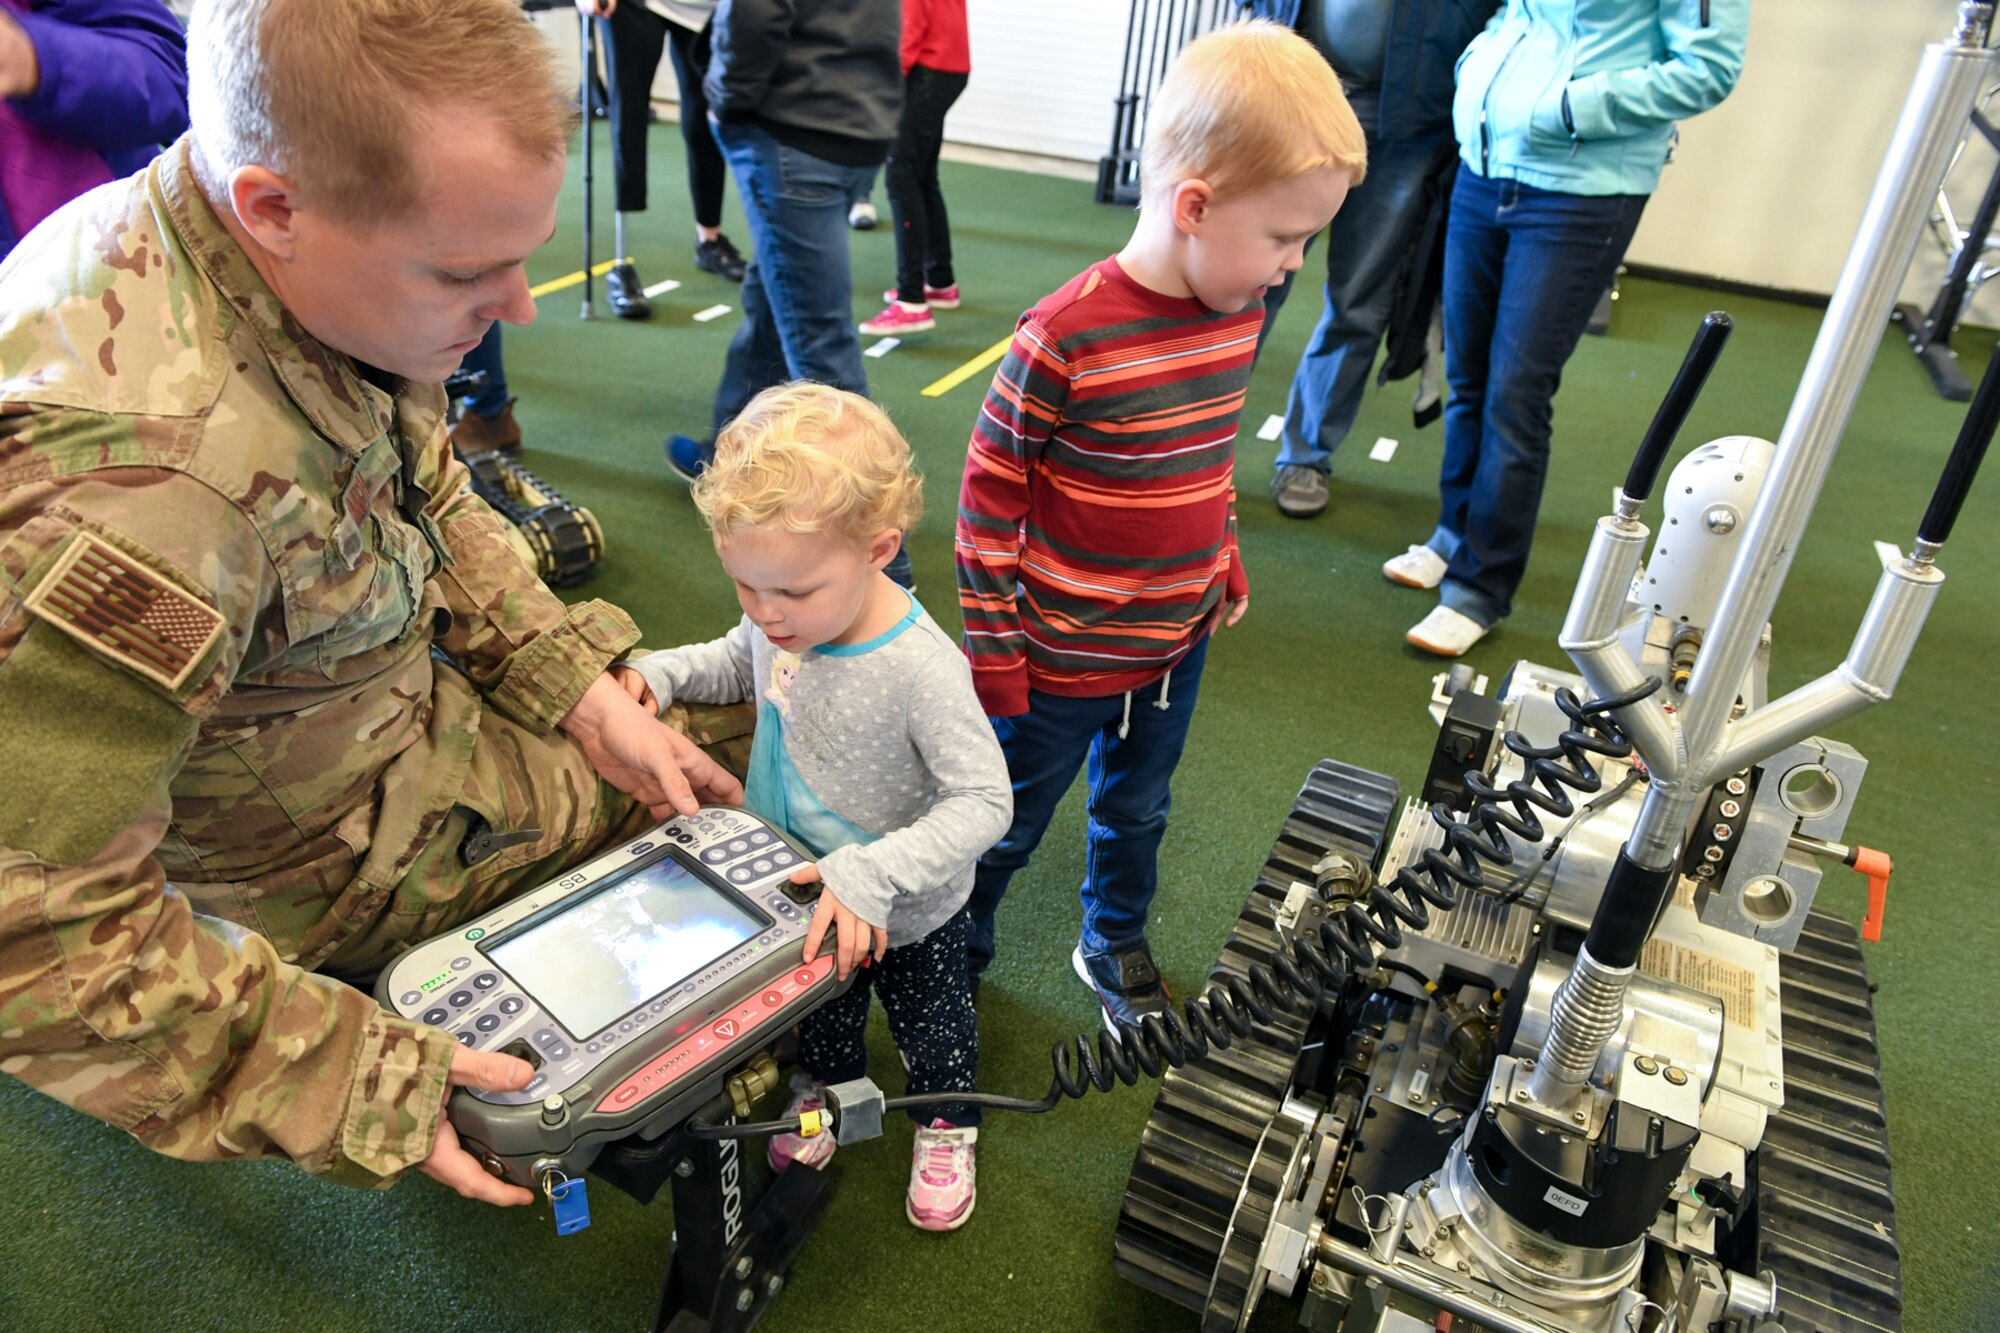 Staff Sgt. Terry Smith, 775th Explosive Ordinance Disposal Flight, shows Gracie and Wesley Michelsen how to operate a robot during a visit to EOD Oct. 11, 2018, at Hill Air Force Base, Utah. The visit was part of a 75th Air Base Wing-hosted base tour for Make-A-Wish Utah children and their families. (U.S. Air Force photo by Cynthia Griggs)